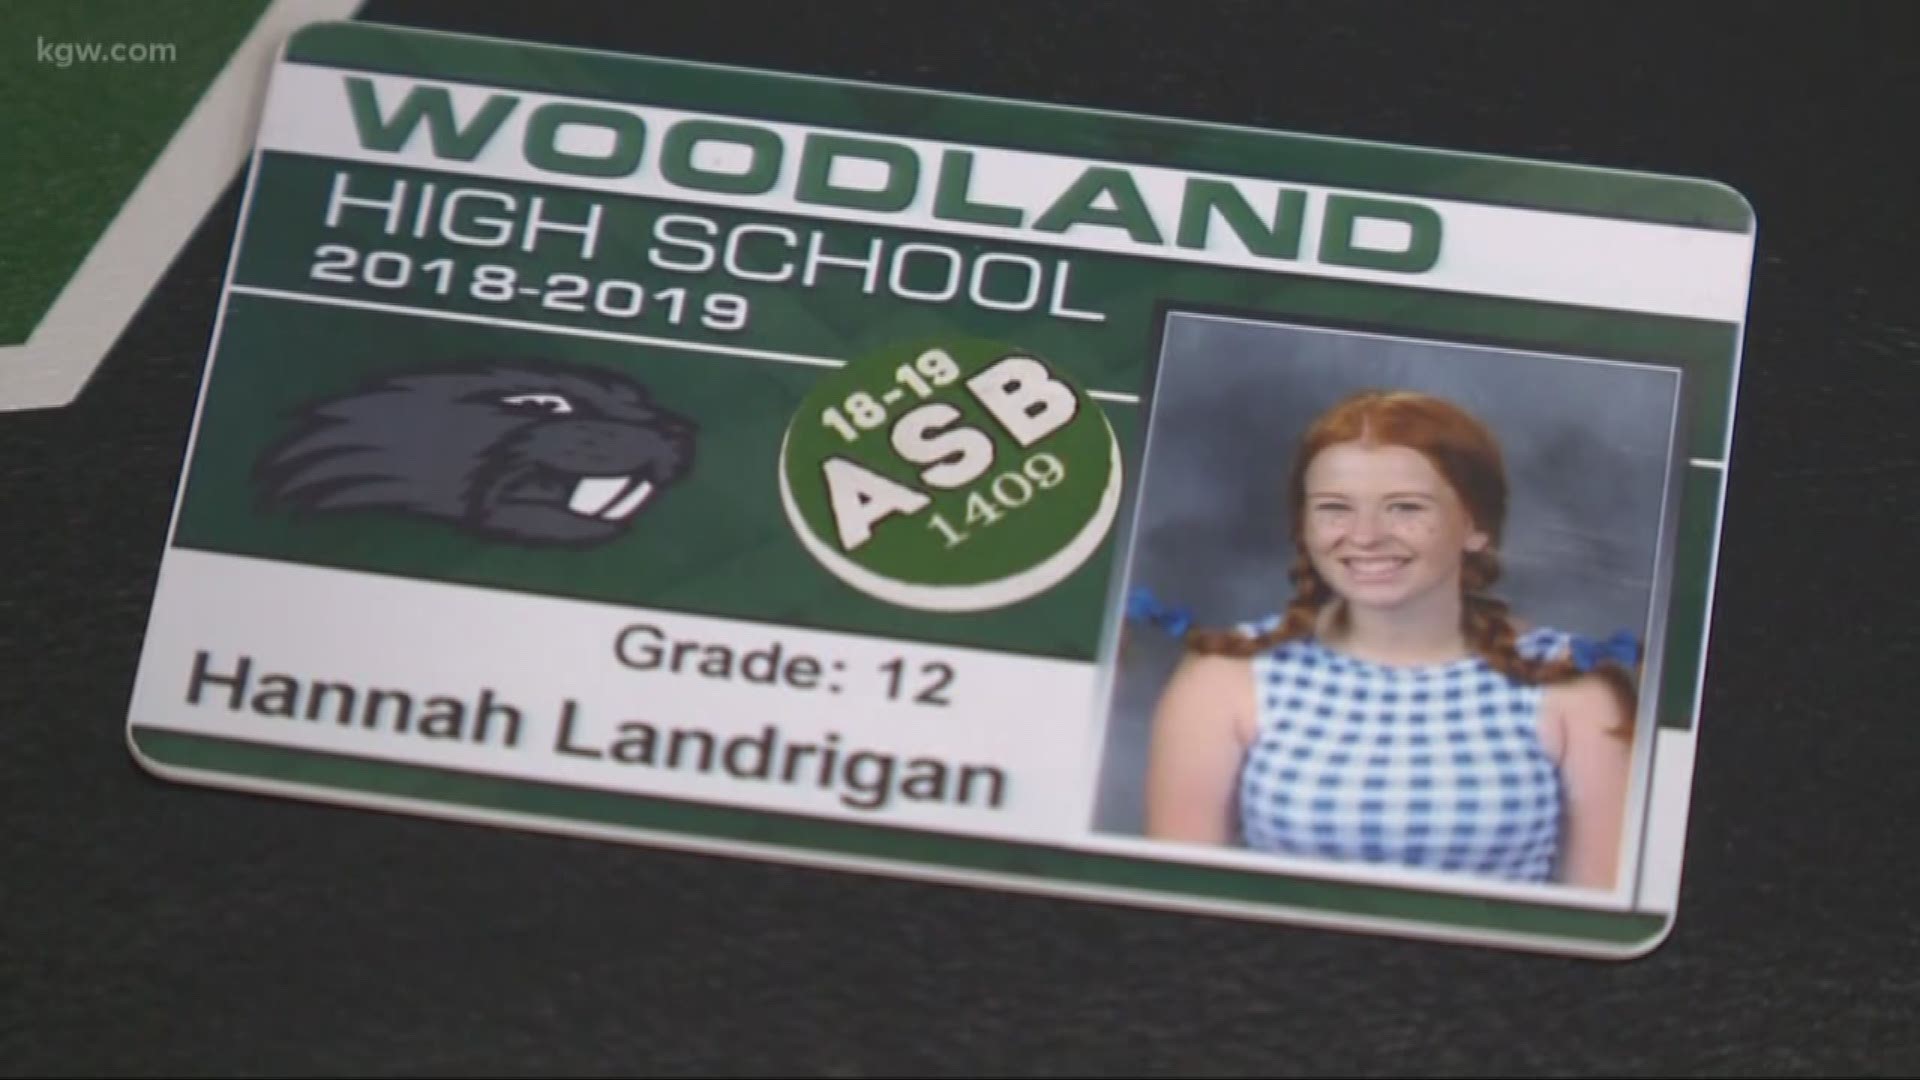 Woodland High School is paying for every students' ASB card.